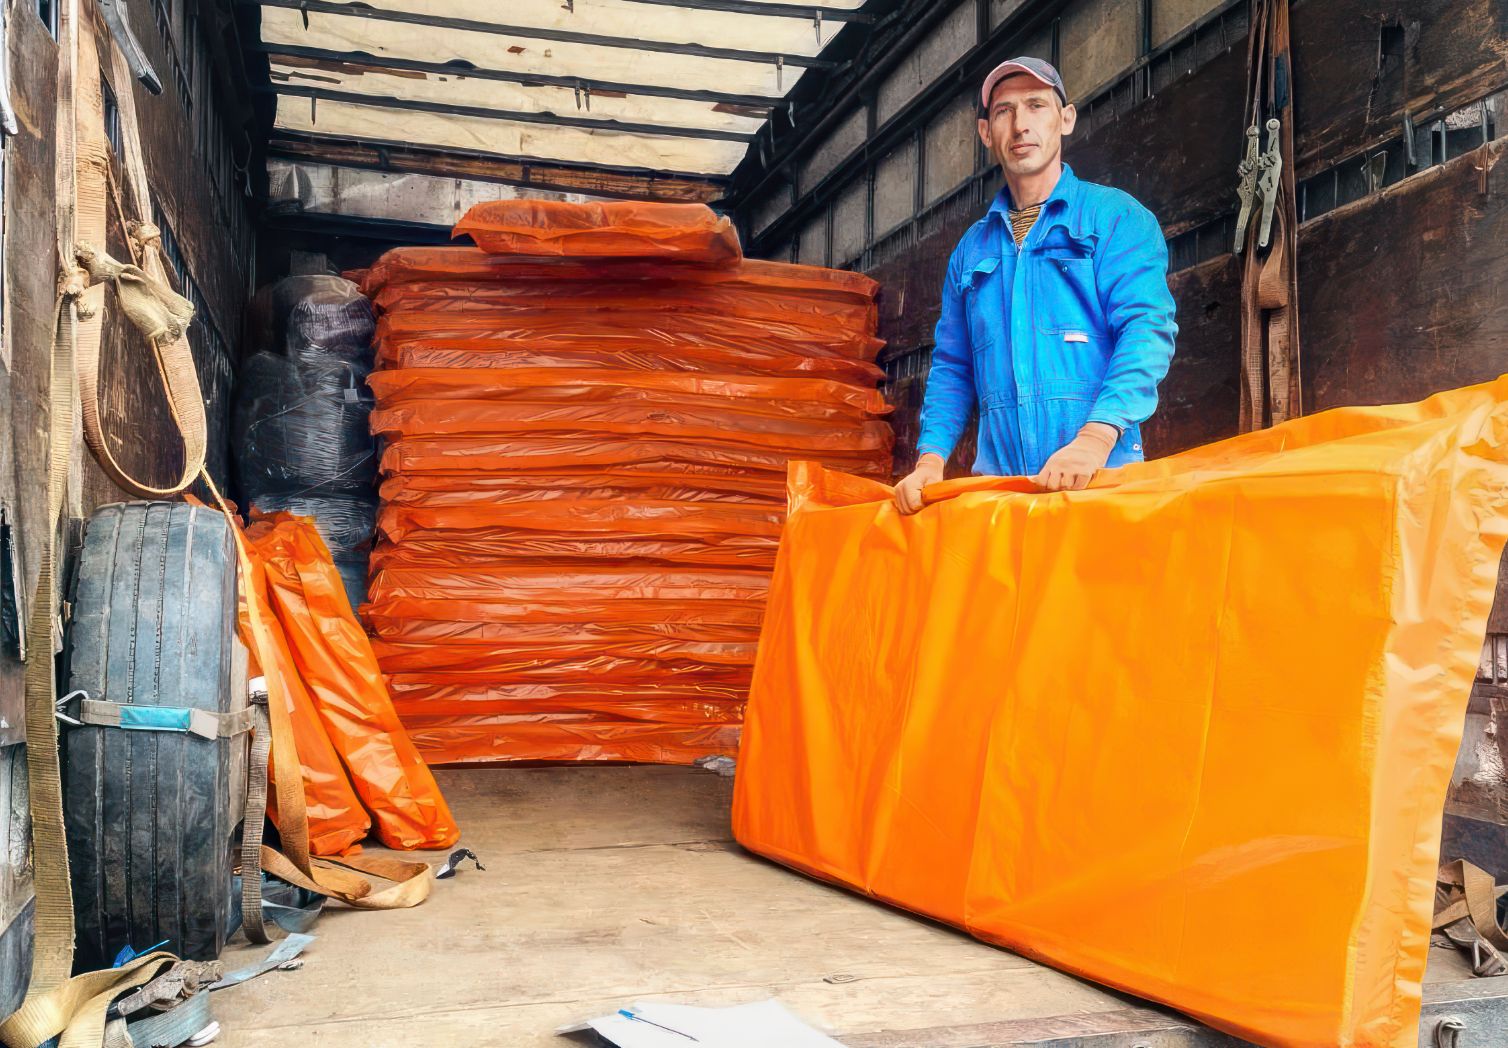 Photo: A man stands in the hold of a truck holding an orange mattress. Behind him, more mattresses are stacked.